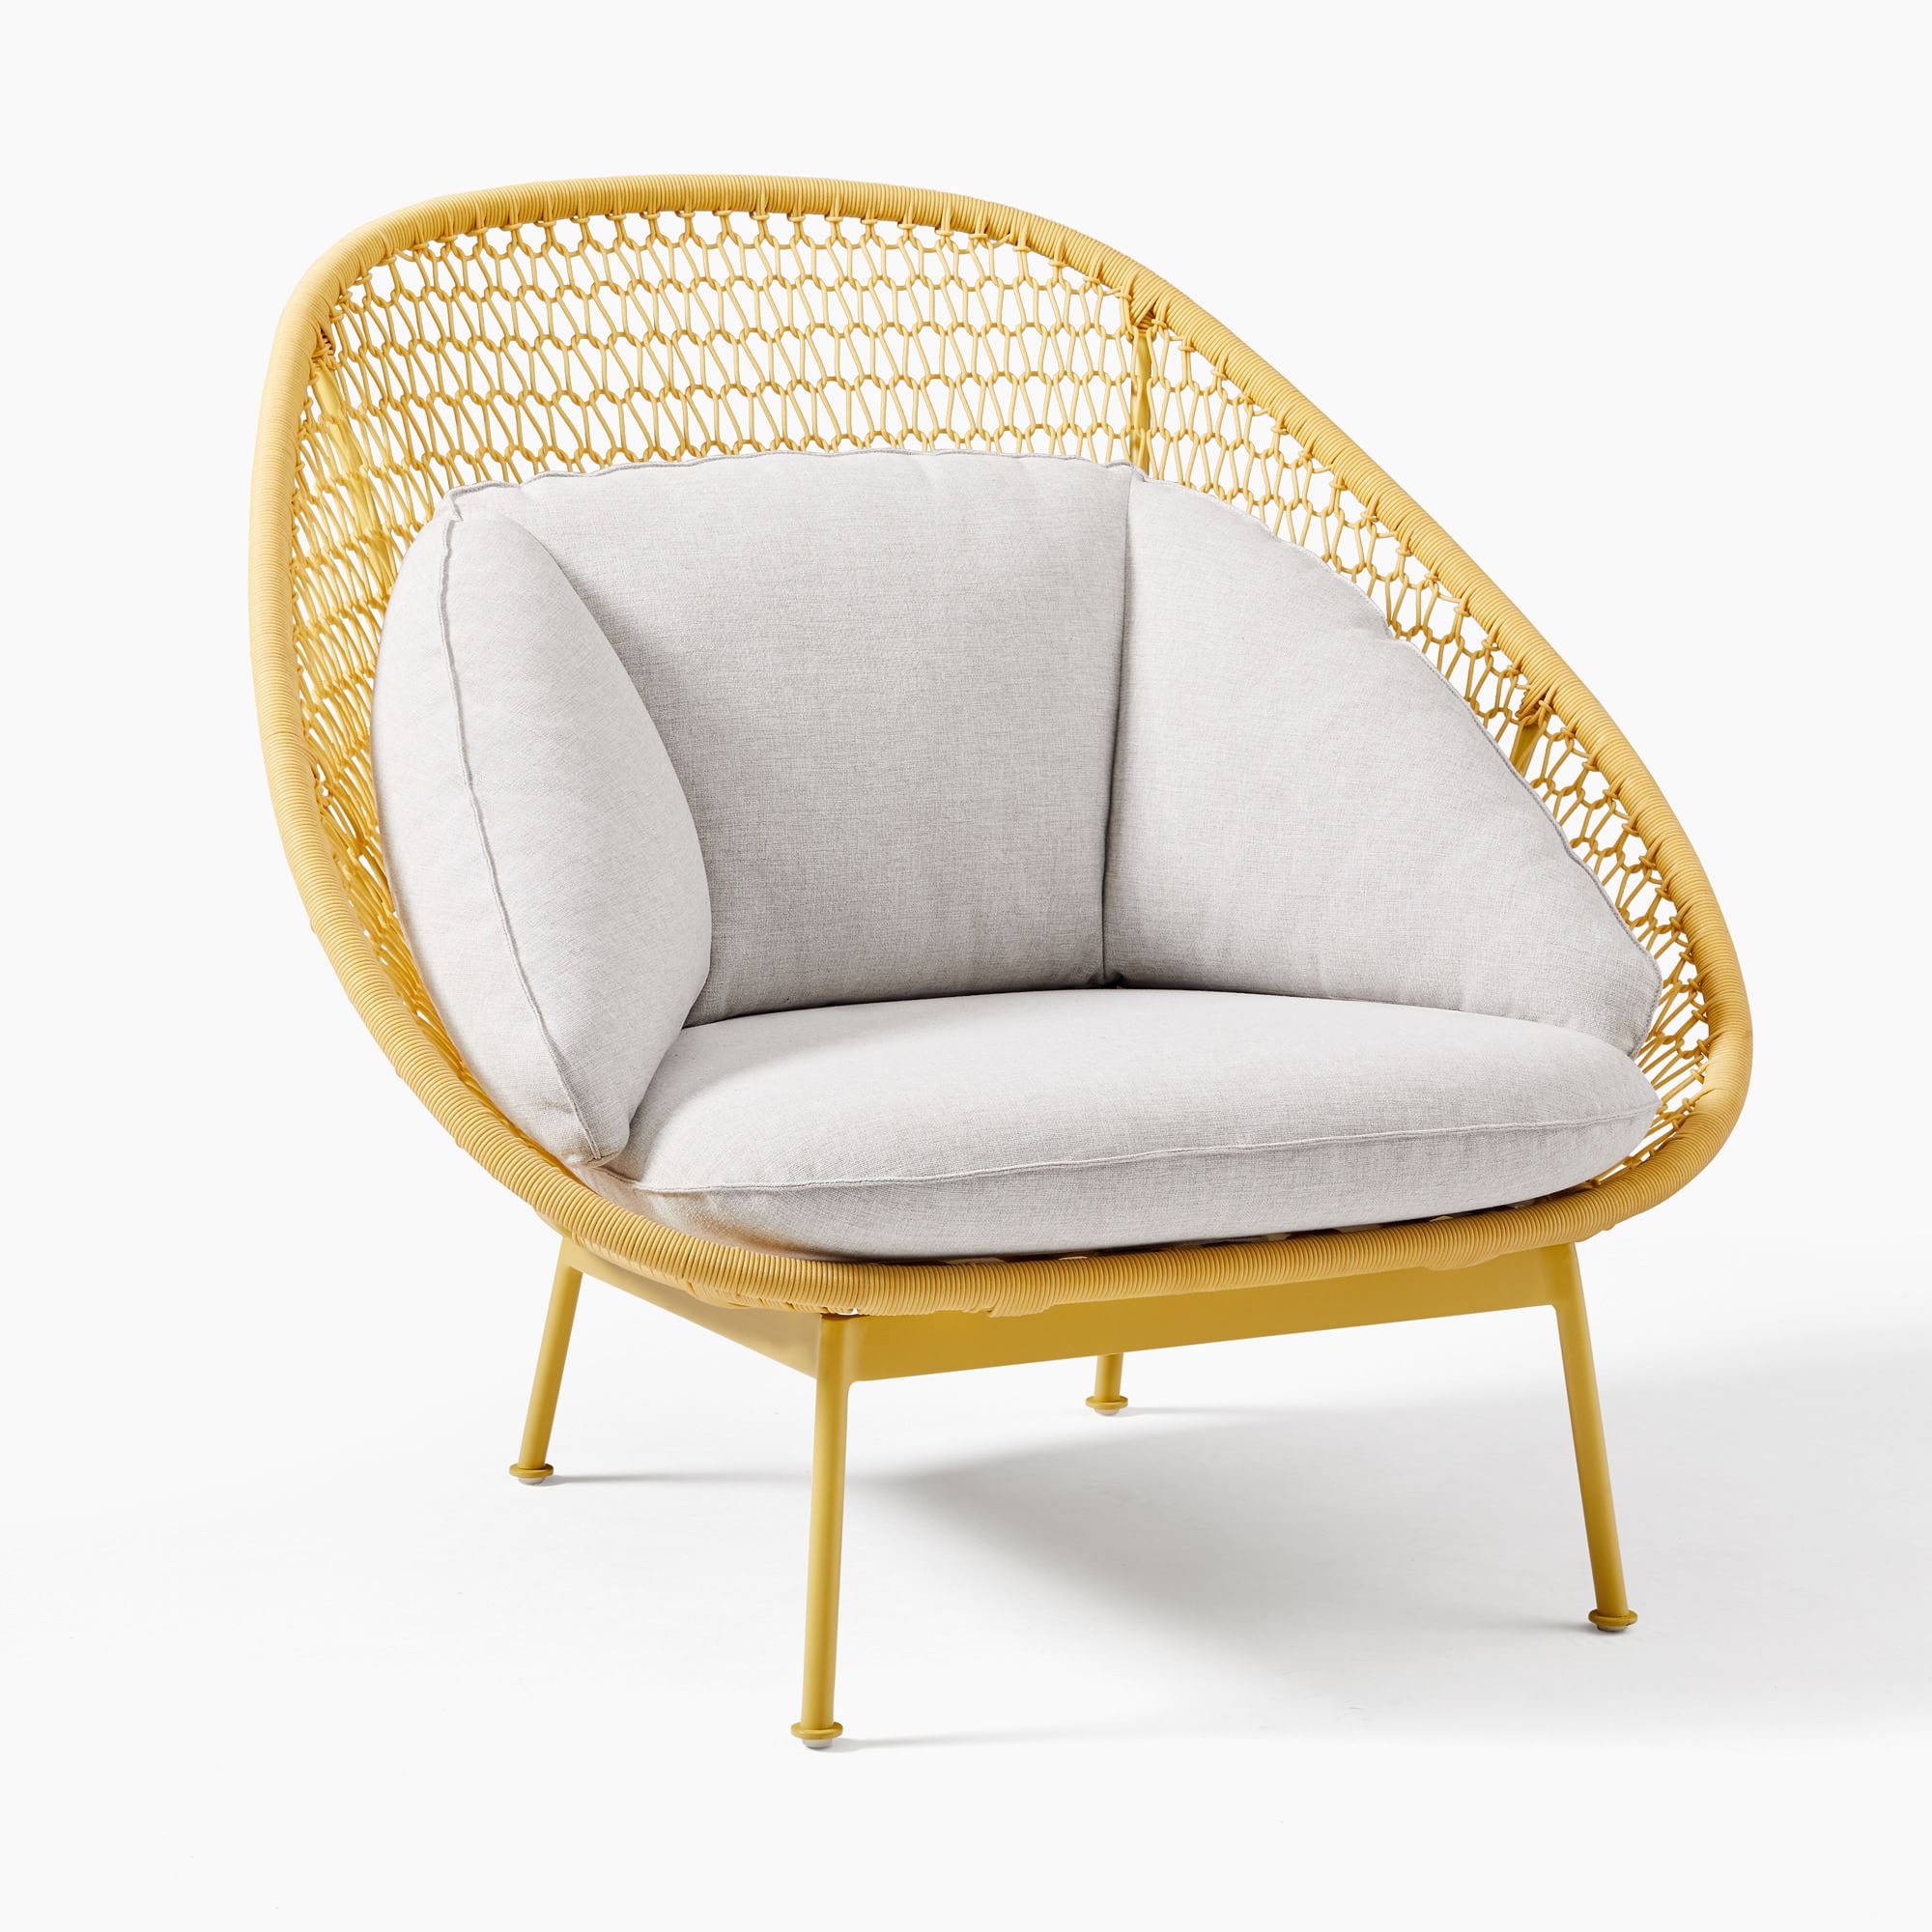 Paradise Outdoor Lounge Chair | West Elm